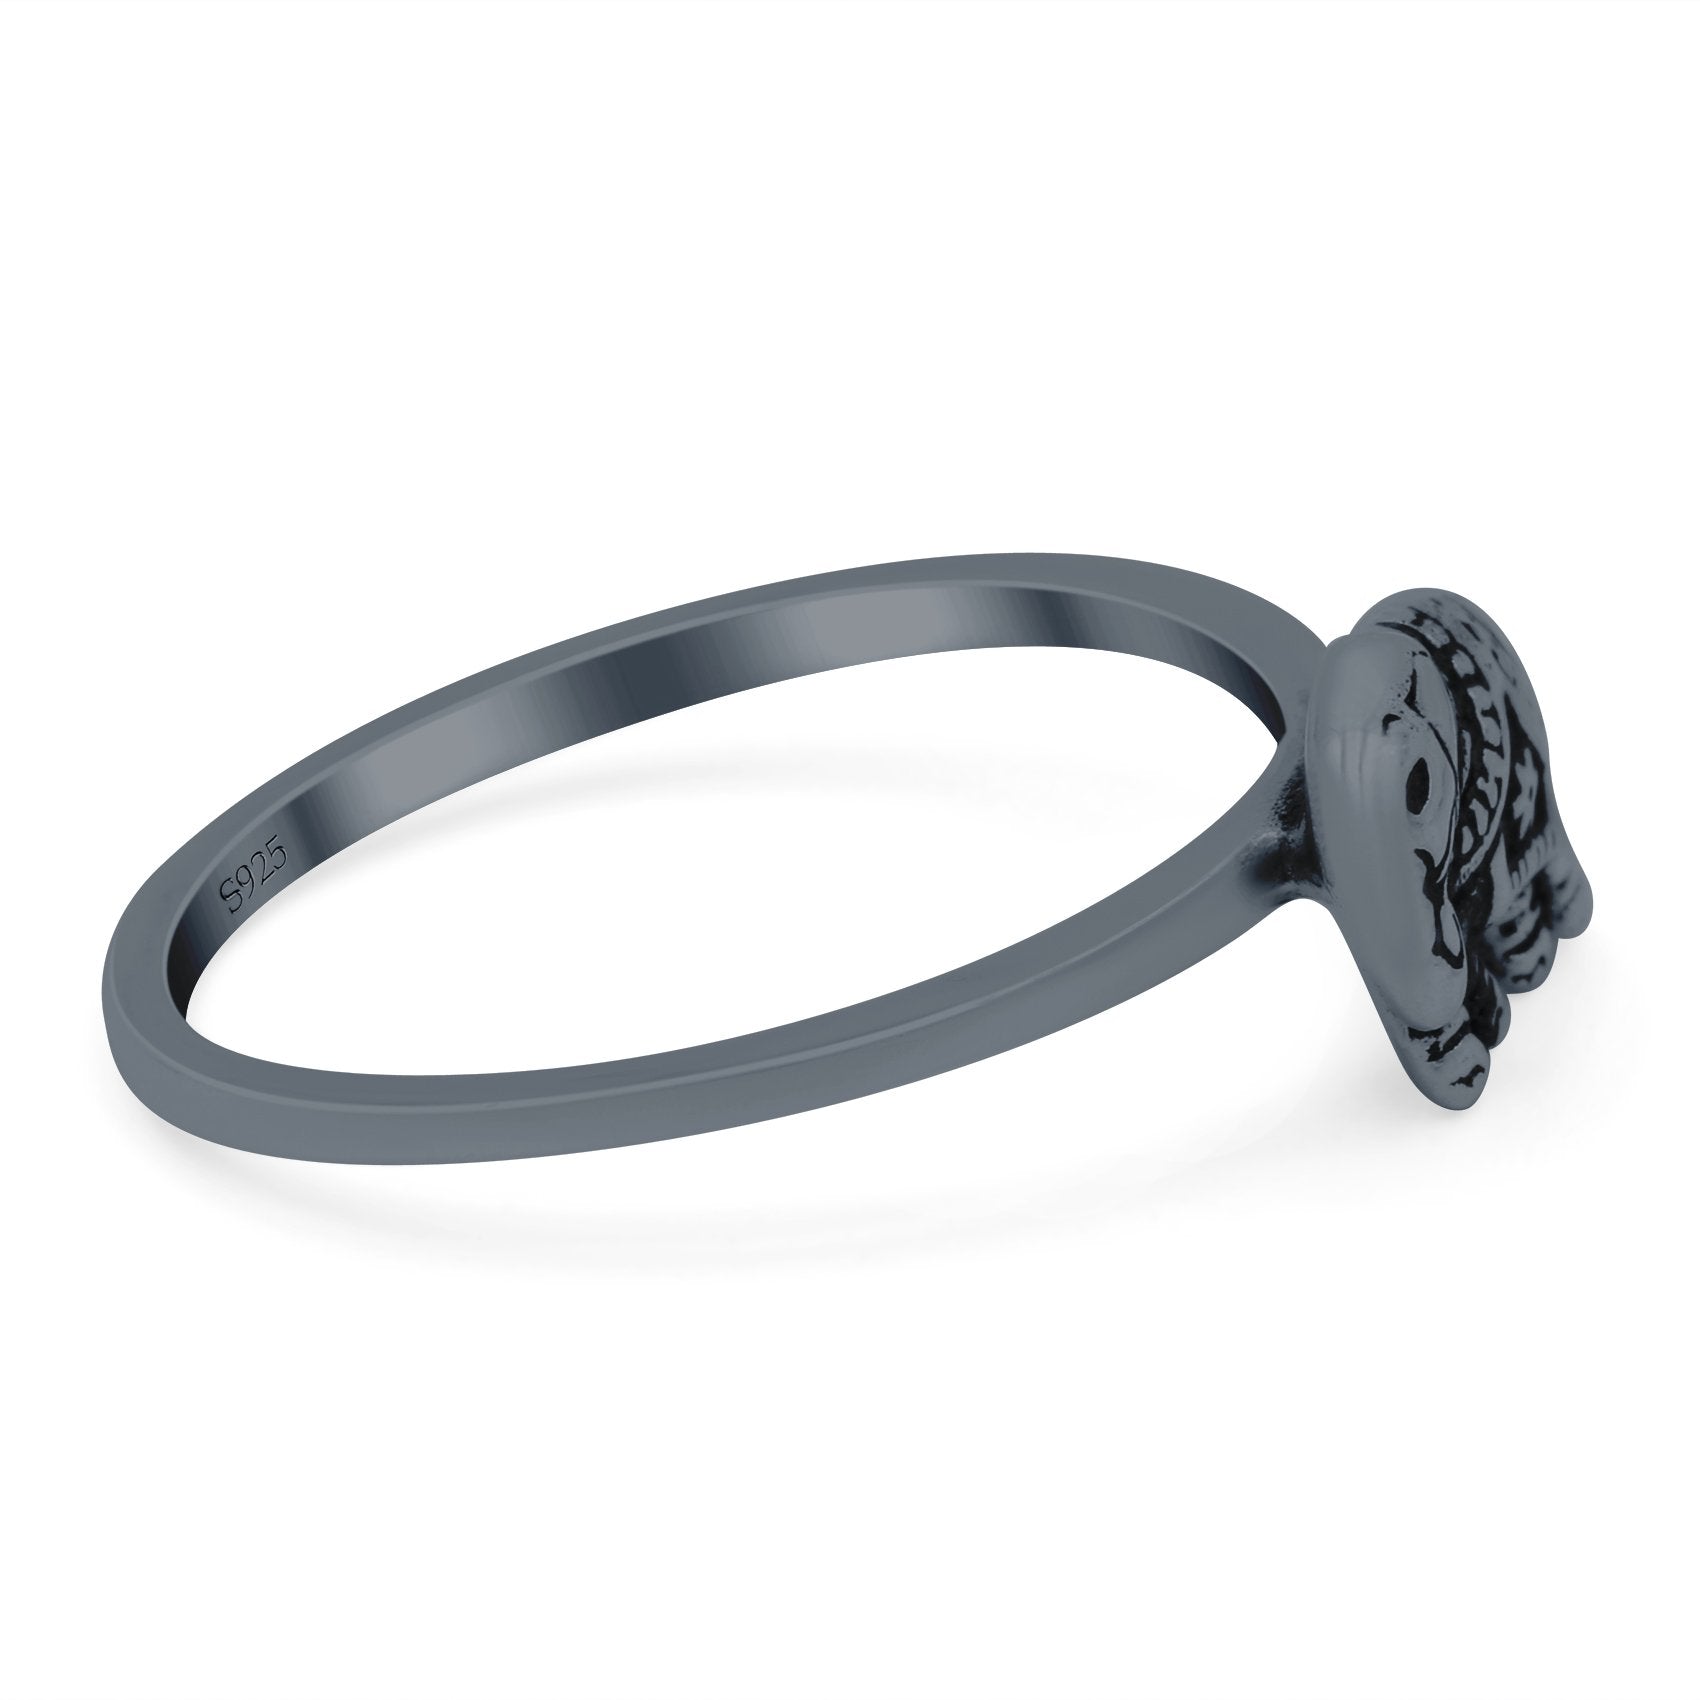 Elephant Ring Oxidized Band Solid 925 Sterling Silver Thumb Ring (7mm)